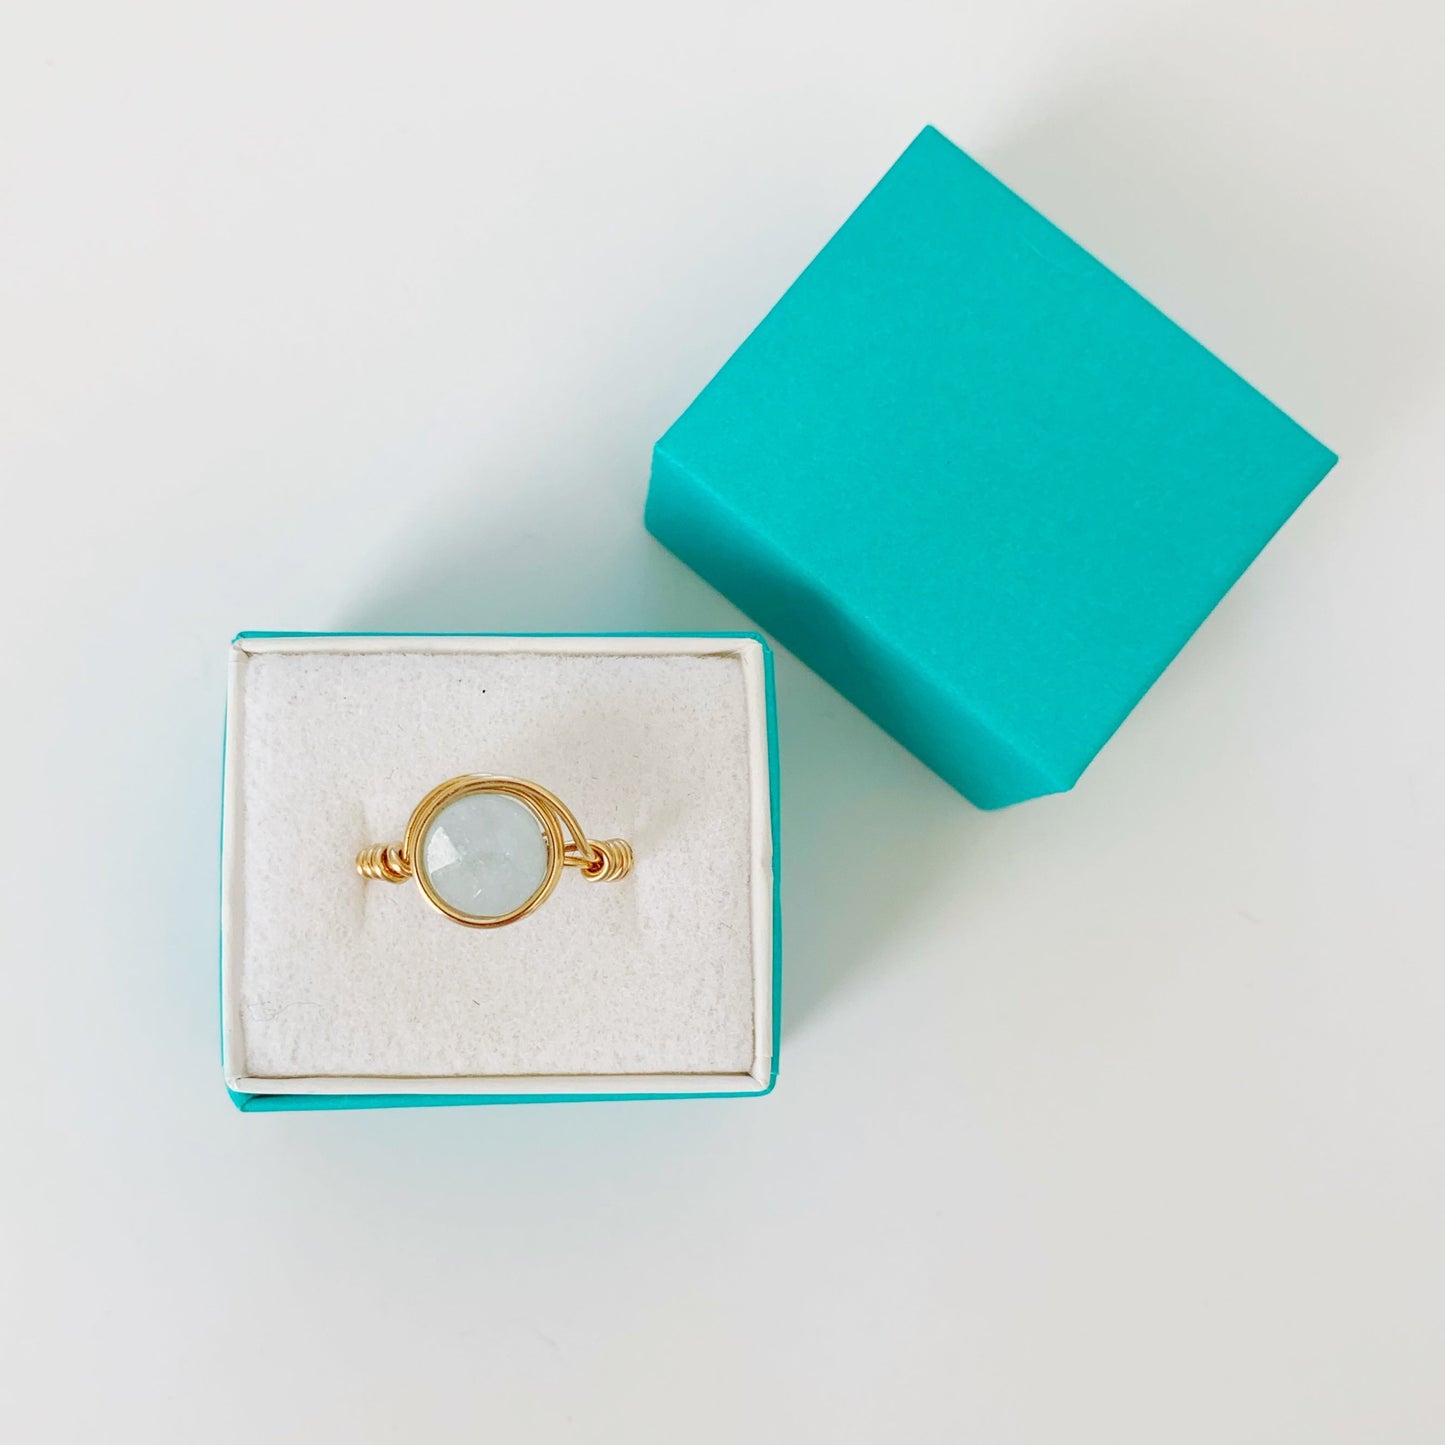 Raindrop wire wrapped aquamarine and 14k gold filled ring photographed in a teal ring box on a white surface